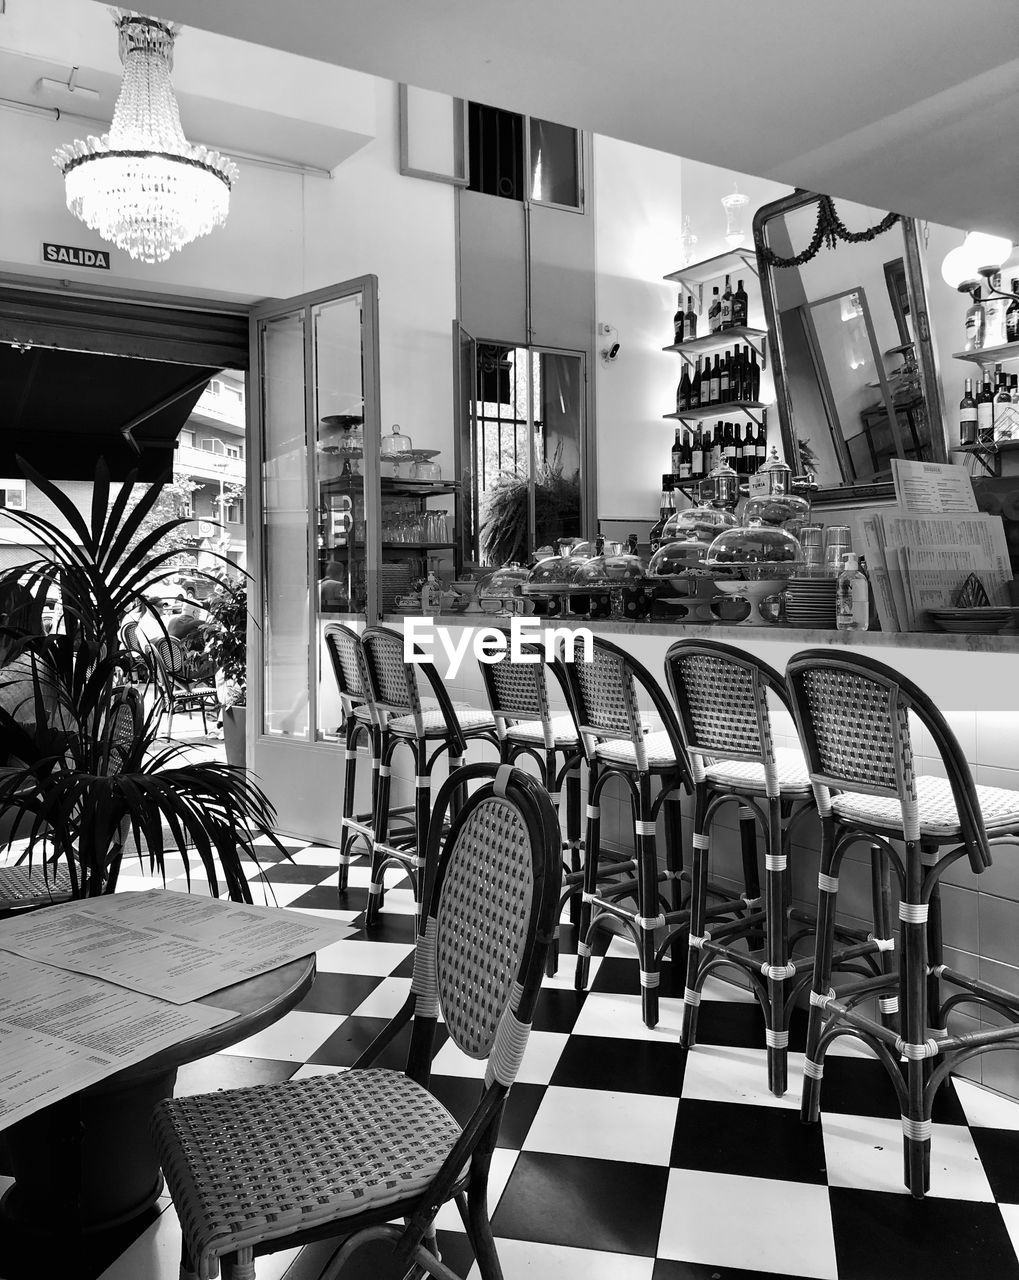 chair, seat, room, table, black and white, indoors, restaurant, interior design, cafe, business, monochrome, no people, architecture, furniture, monochrome photography, white, empty, flooring, building, built structure, food and drink, lighting equipment, absence